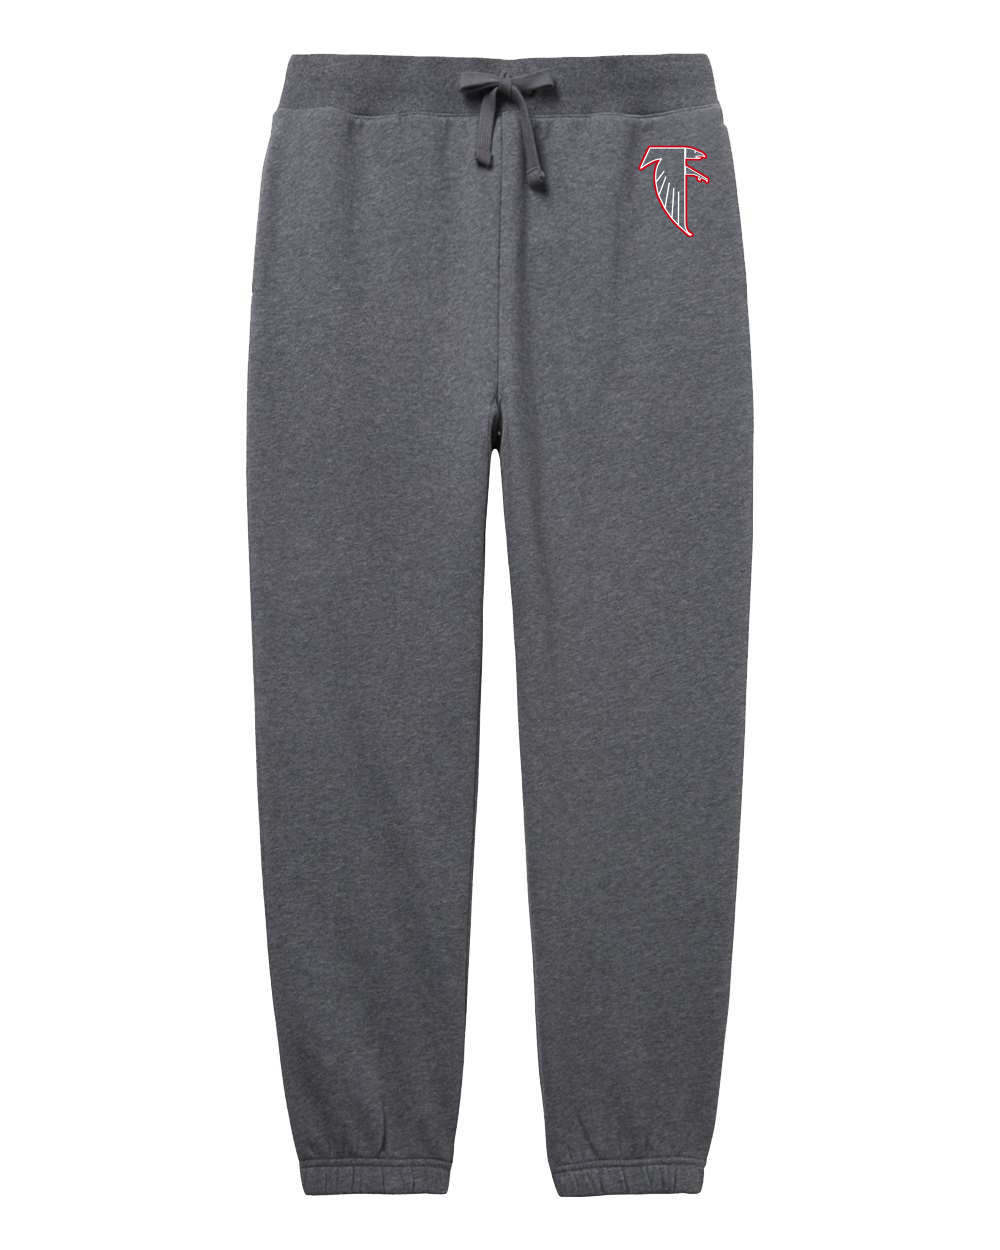 Adult - Firelands Falcons - Grey - Unisex Jogger Sweatpants - Mistakes on the Lake